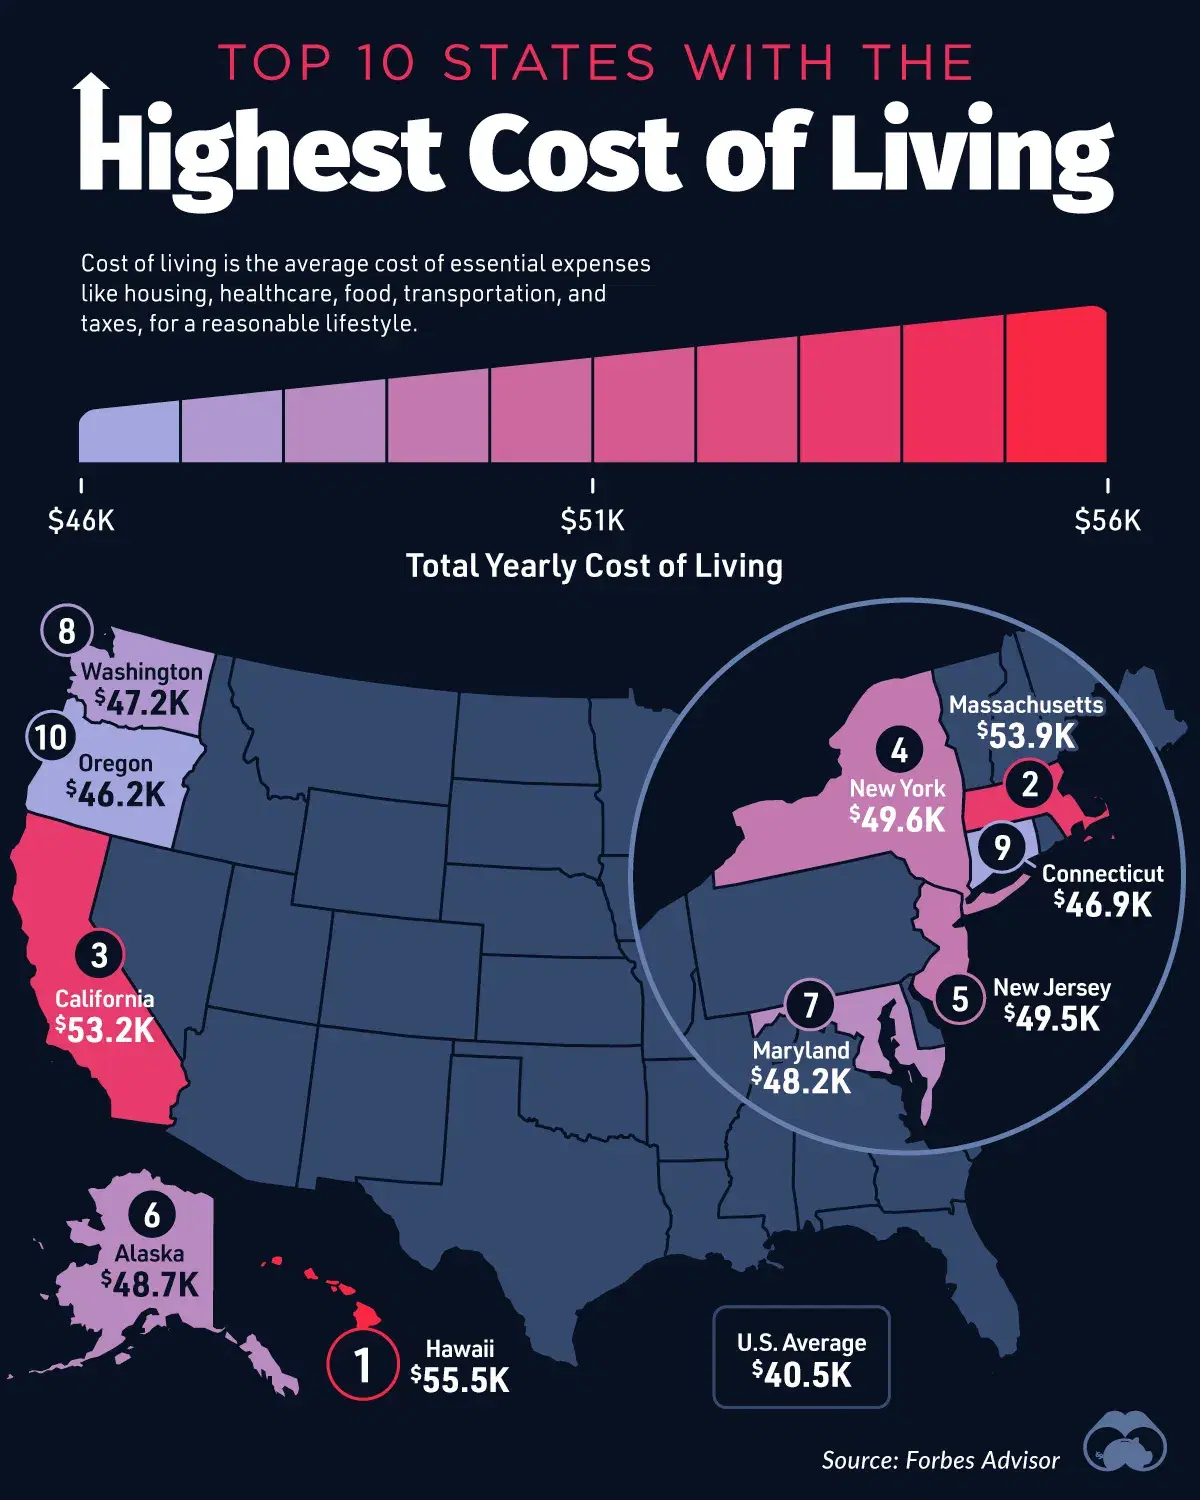 Hawaii is the State with the Highest Cost of Living 💸